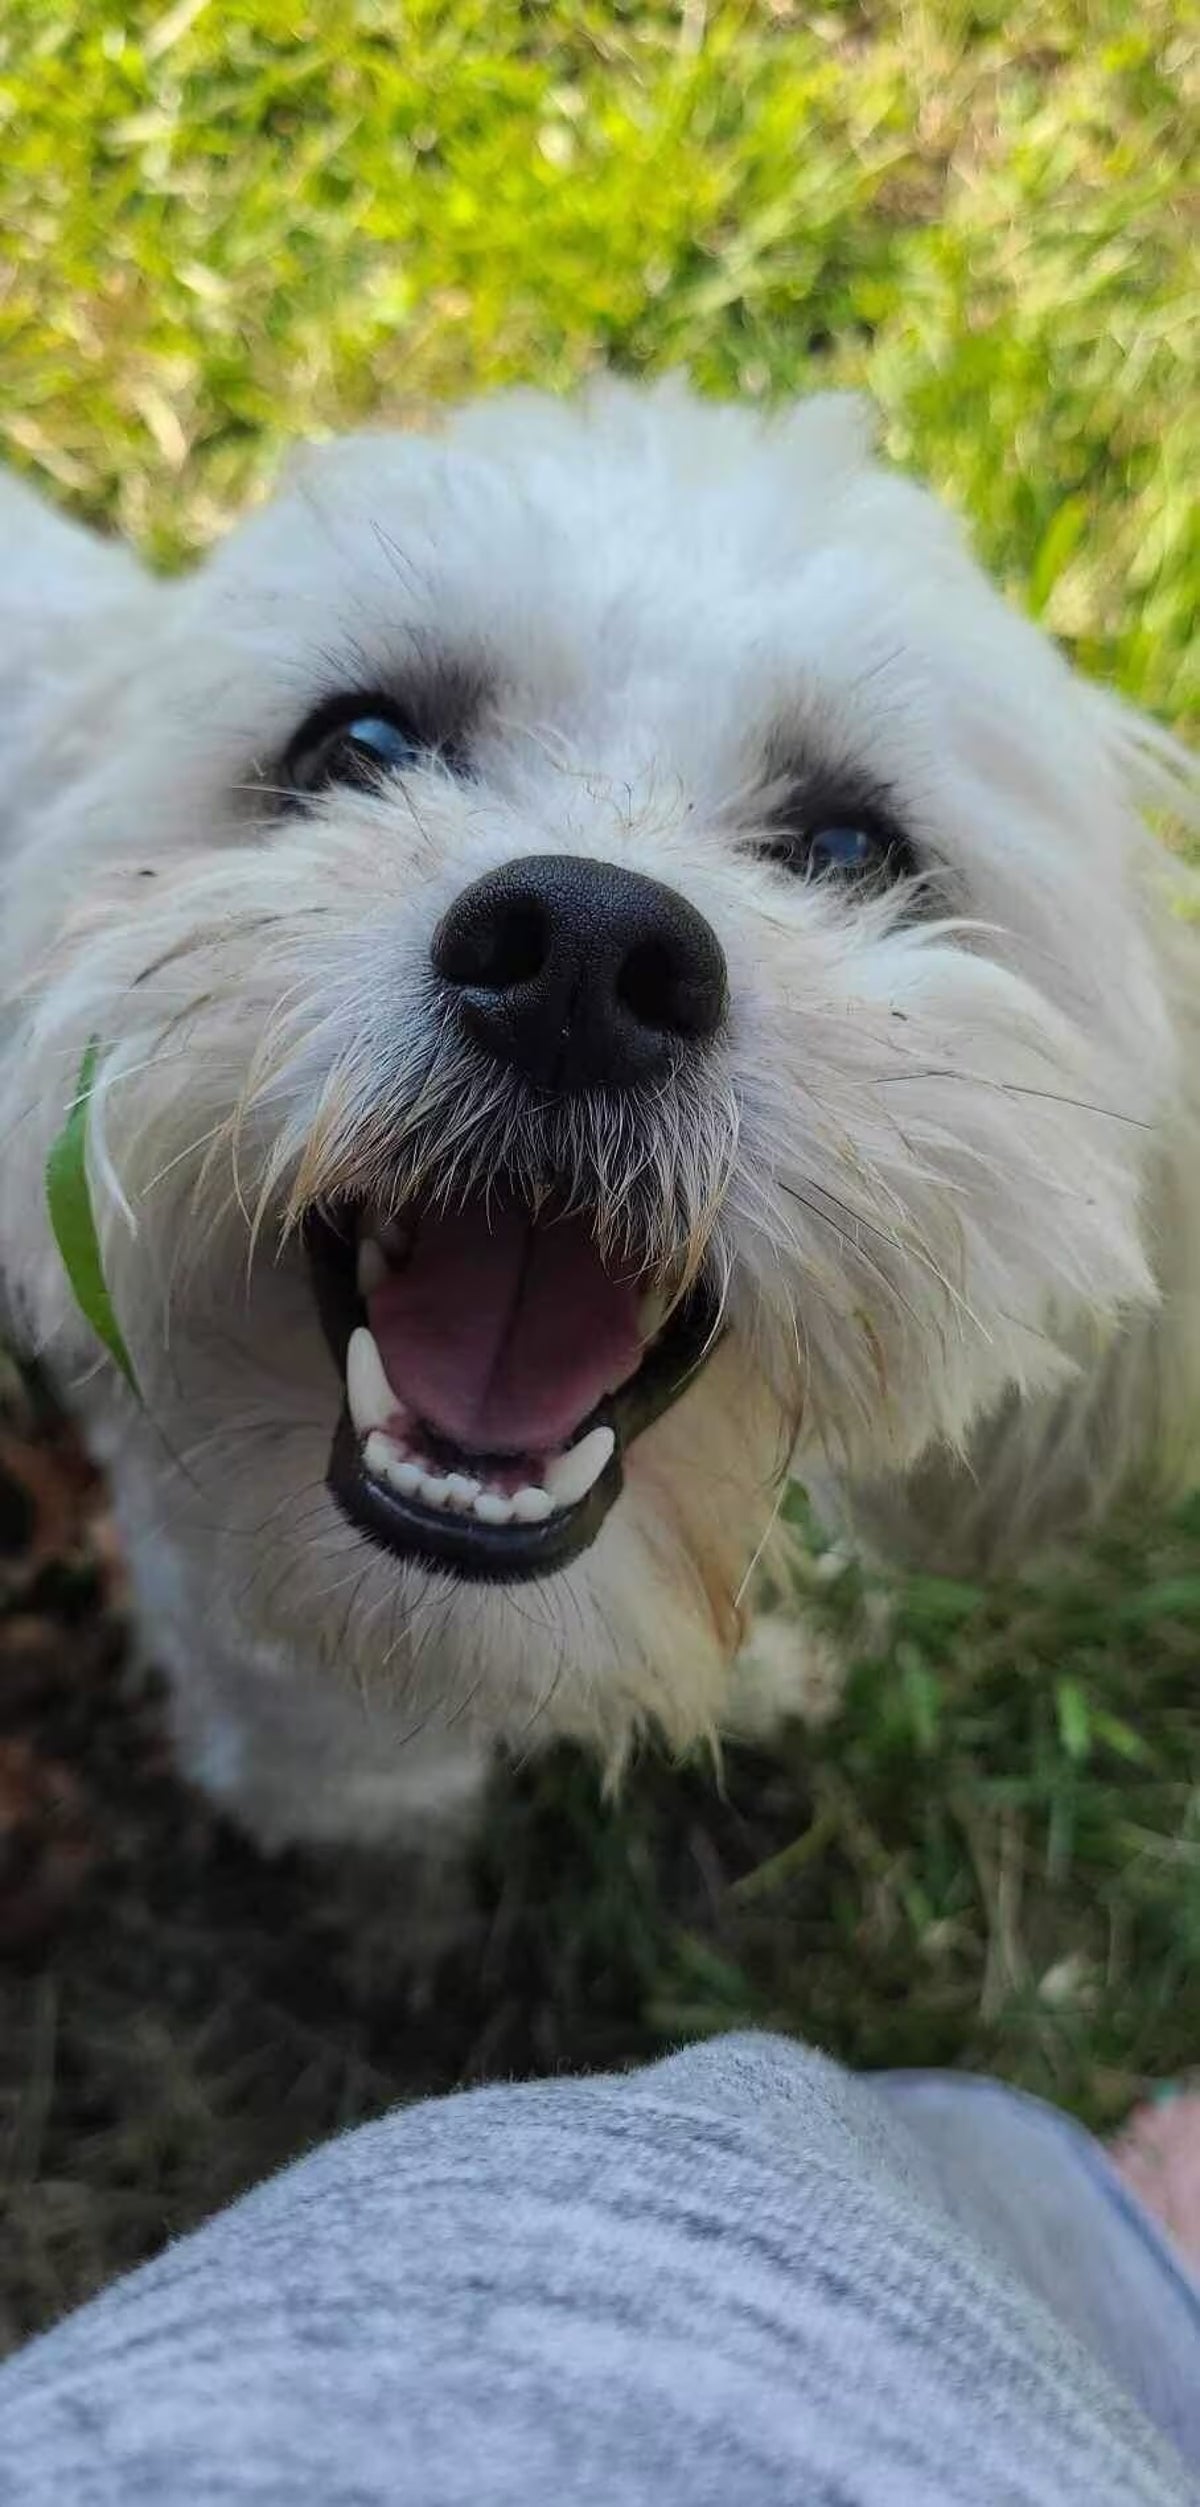 Blind and deaf dog Teddy got lost in a neighbor’s yard. Police called to help him shot him dead